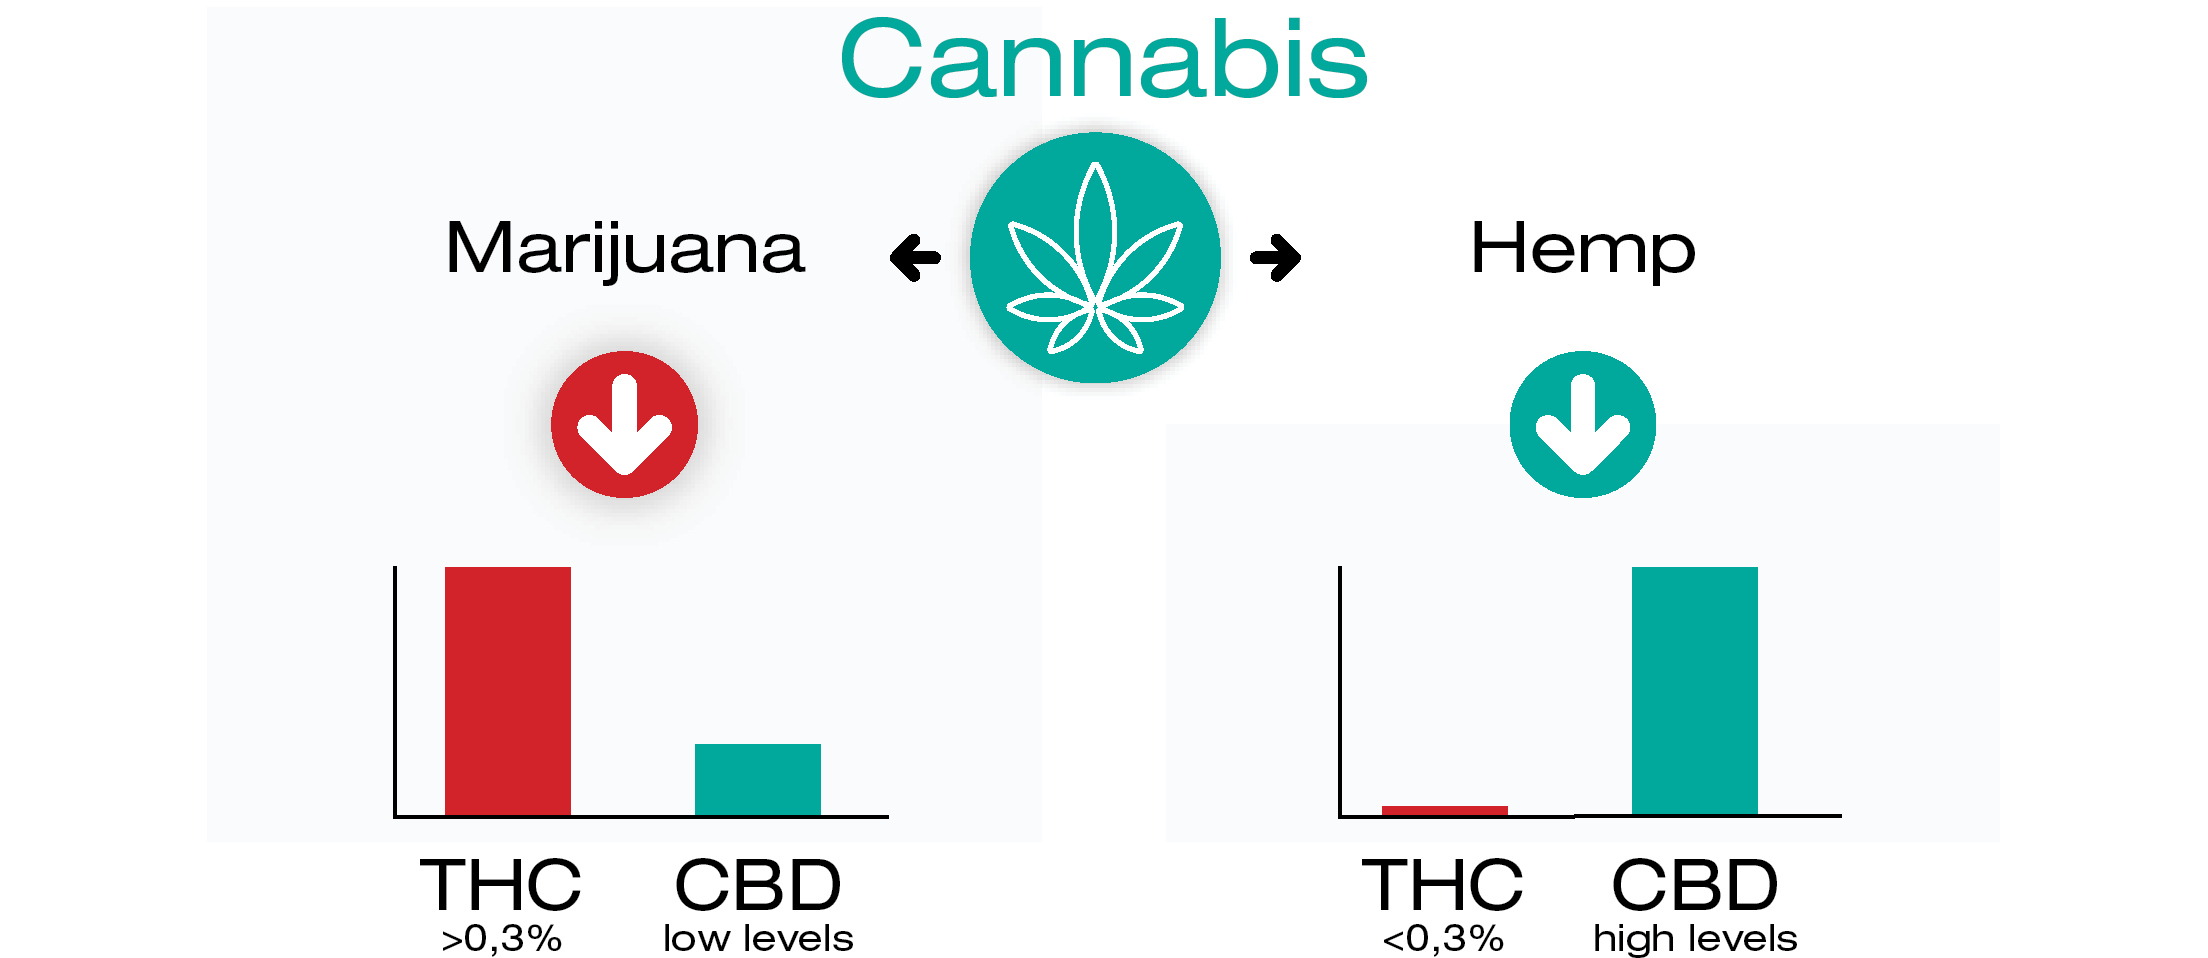 Where do CBD and THC come from?